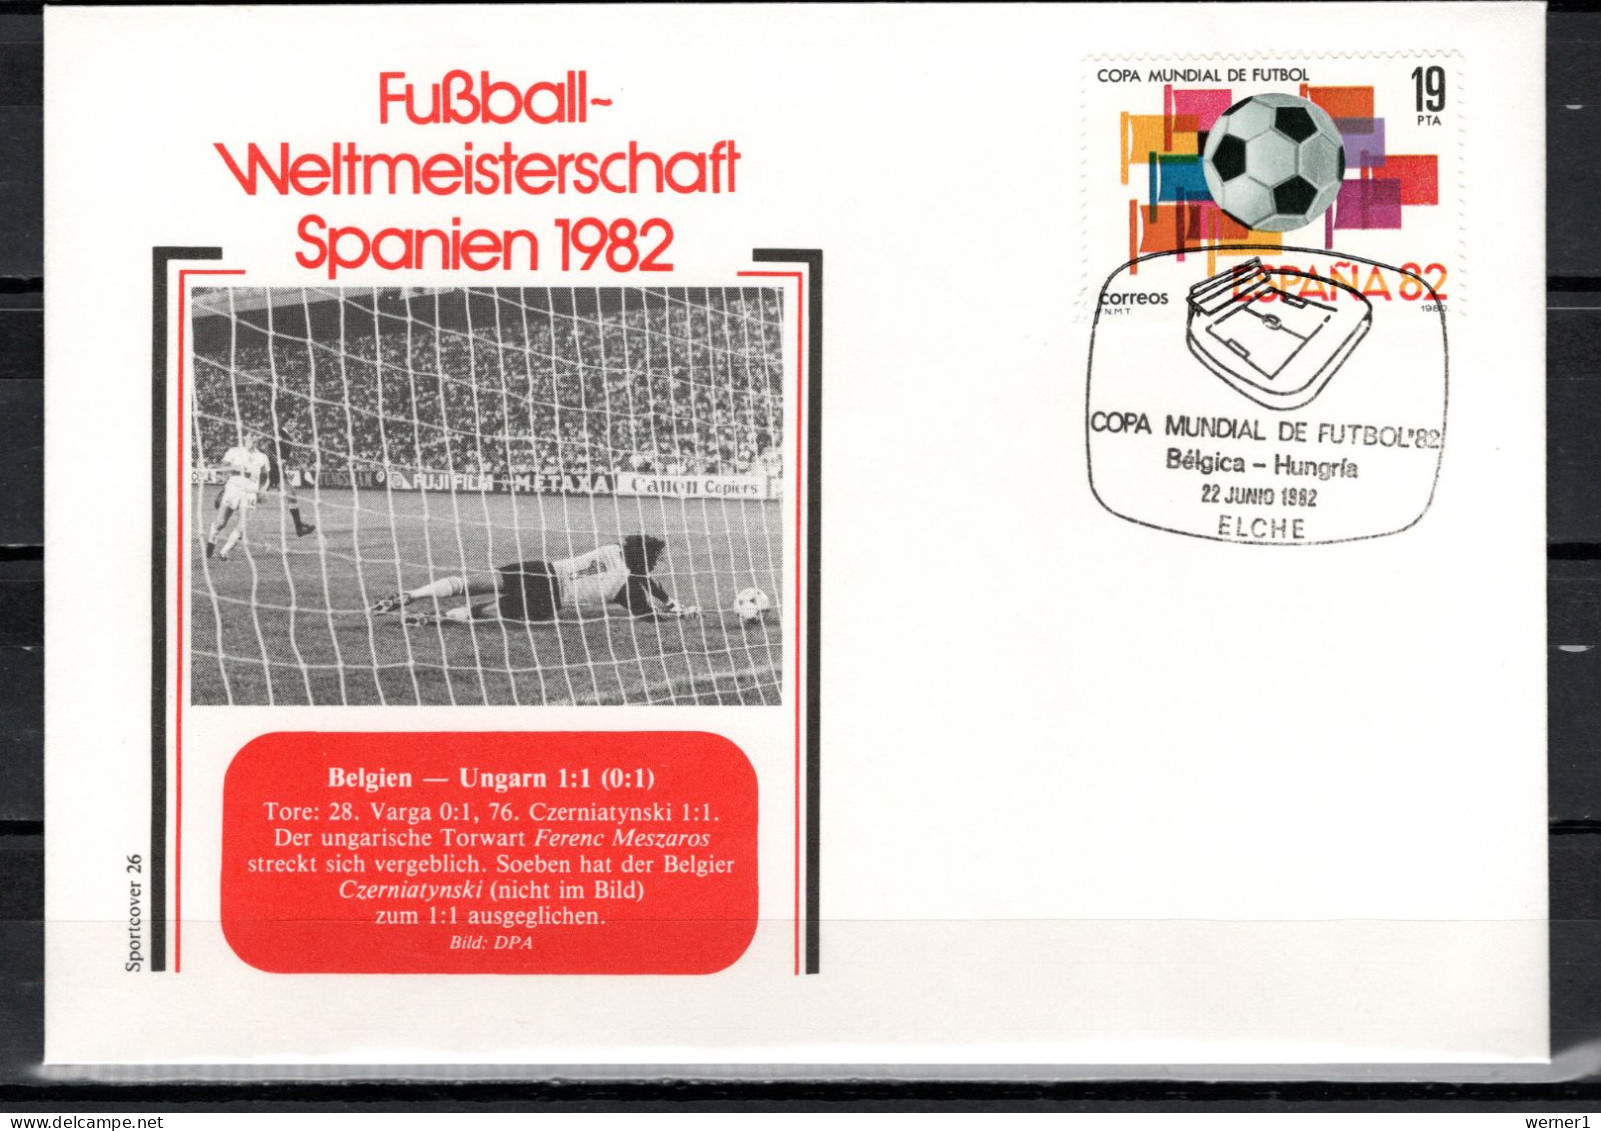 Spain 1982 Football Soccer World Cup Commemorative Cover Match Belgium - Hungary 1:1 - 1982 – Spain